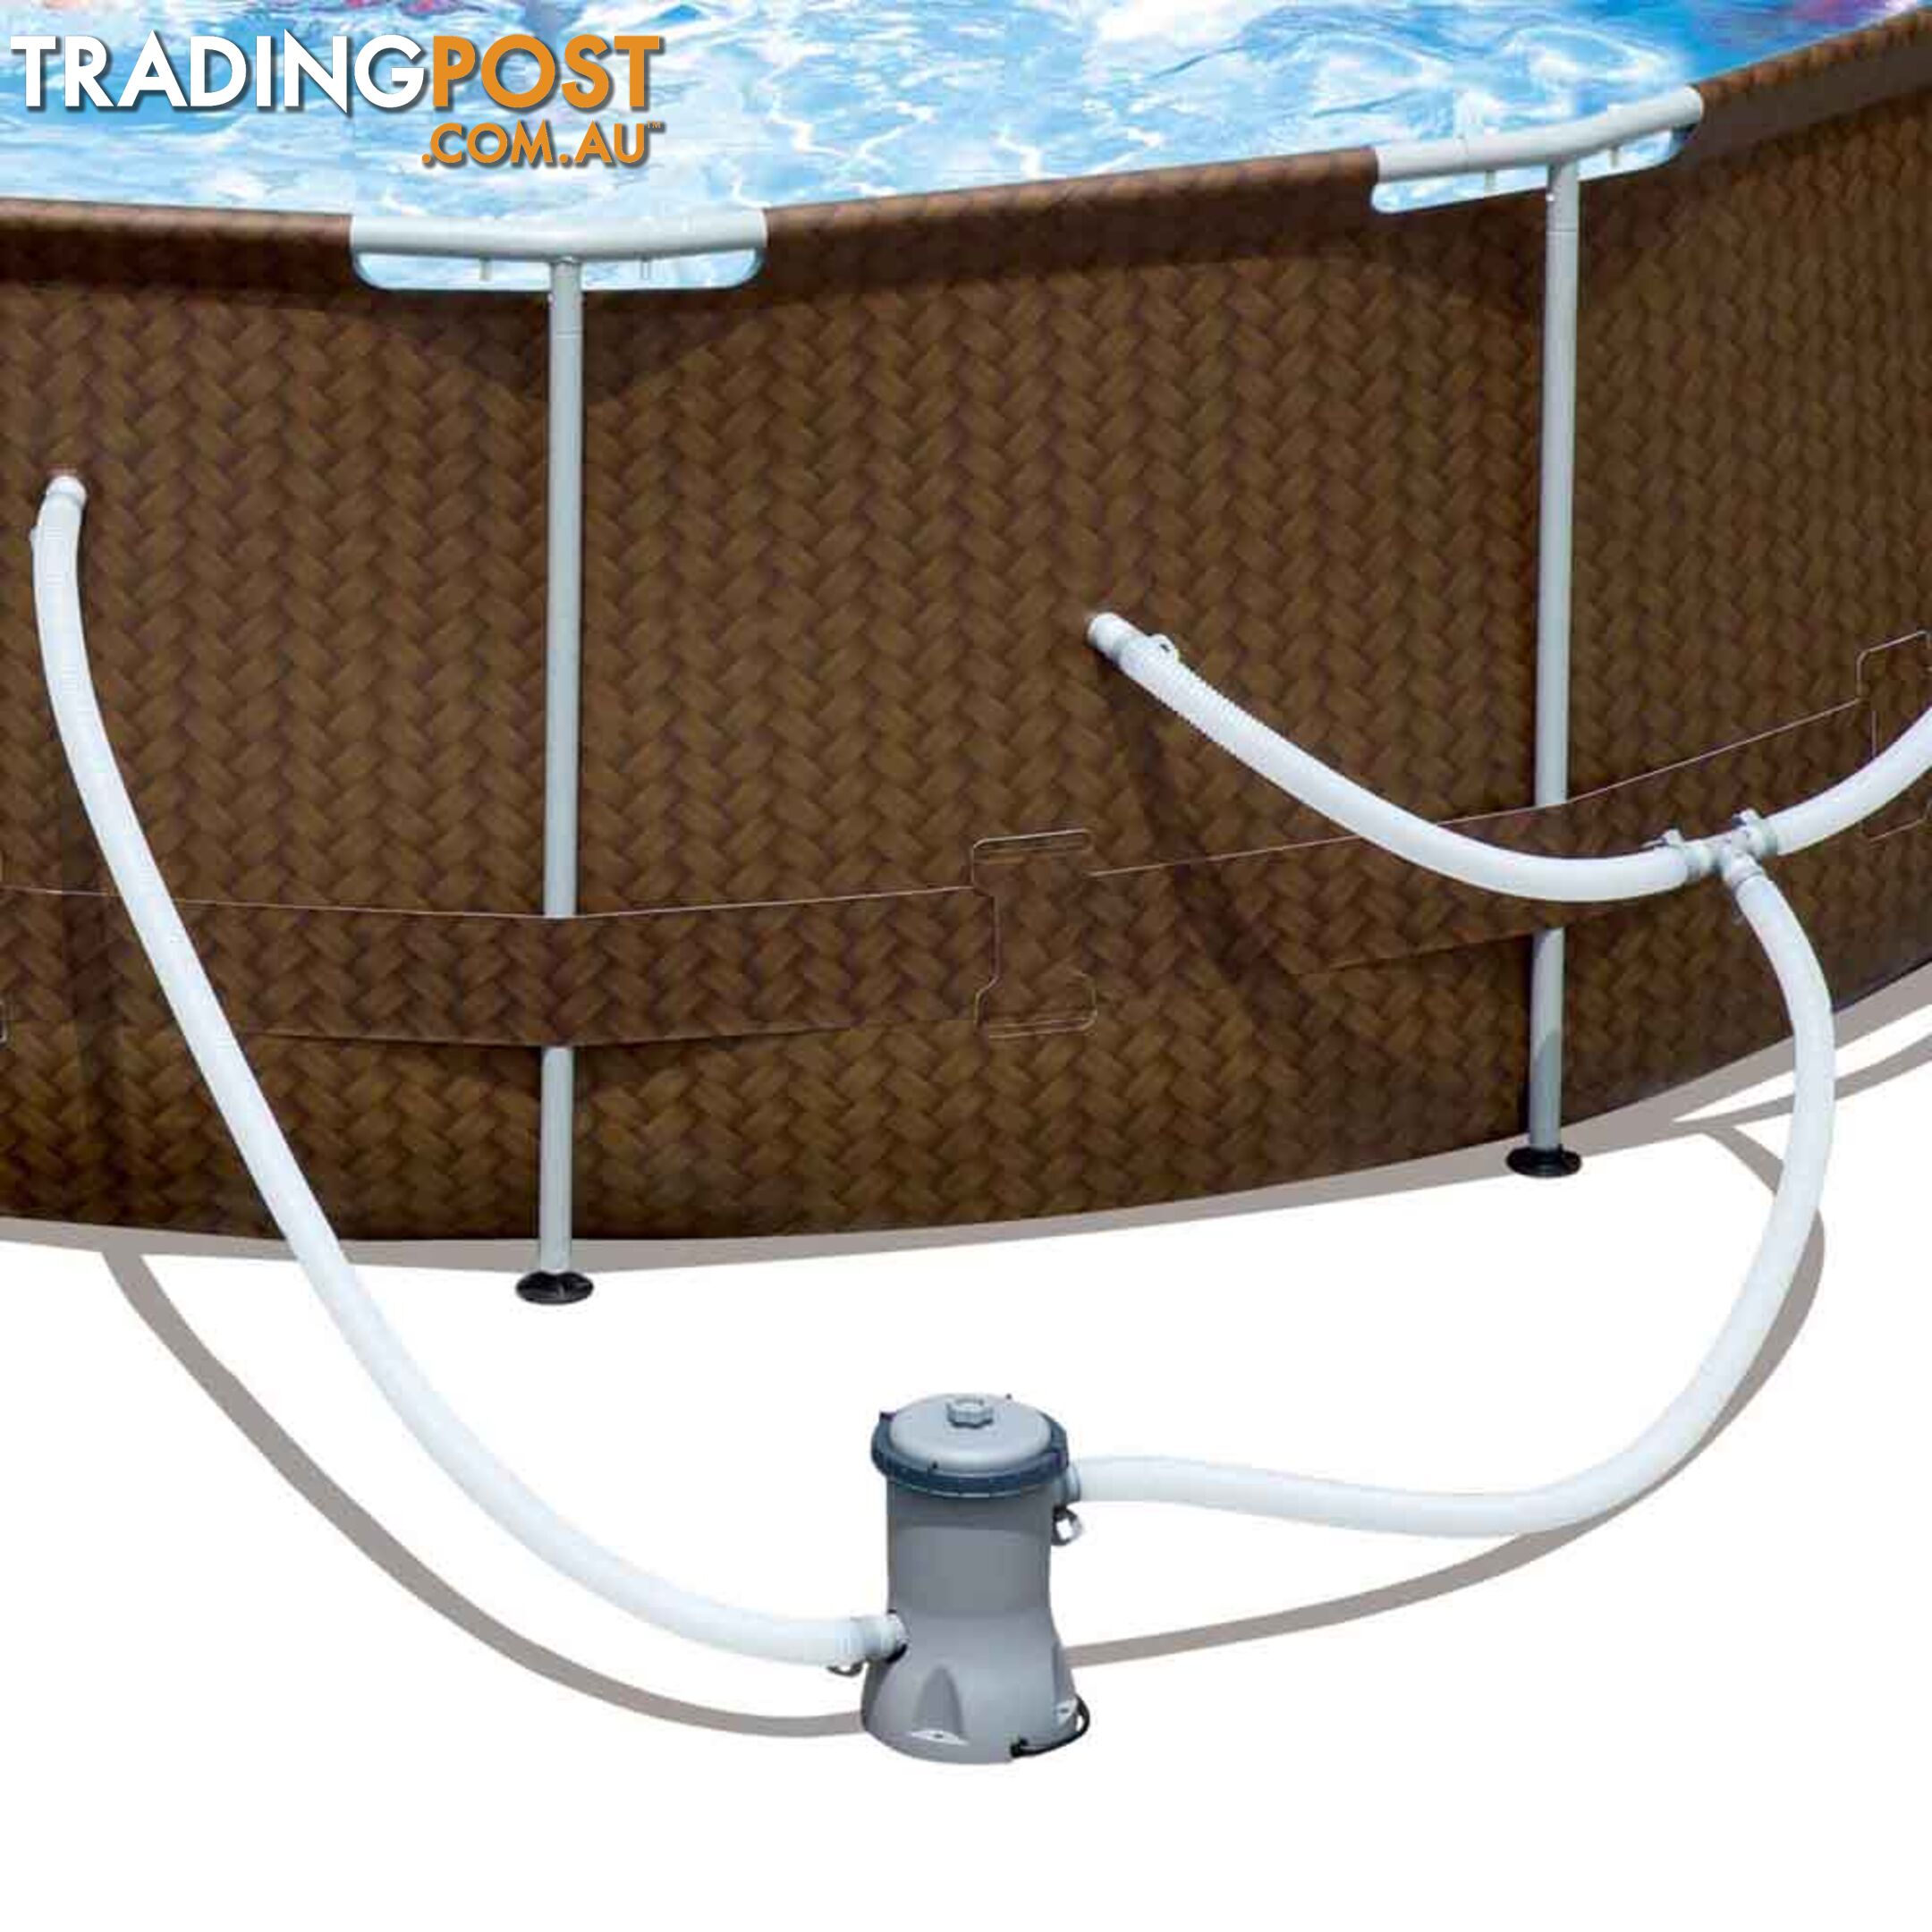 12Ft Above Ground Swimming Pool 3.66M x 1M Filter Pump Rattan Steel Frame